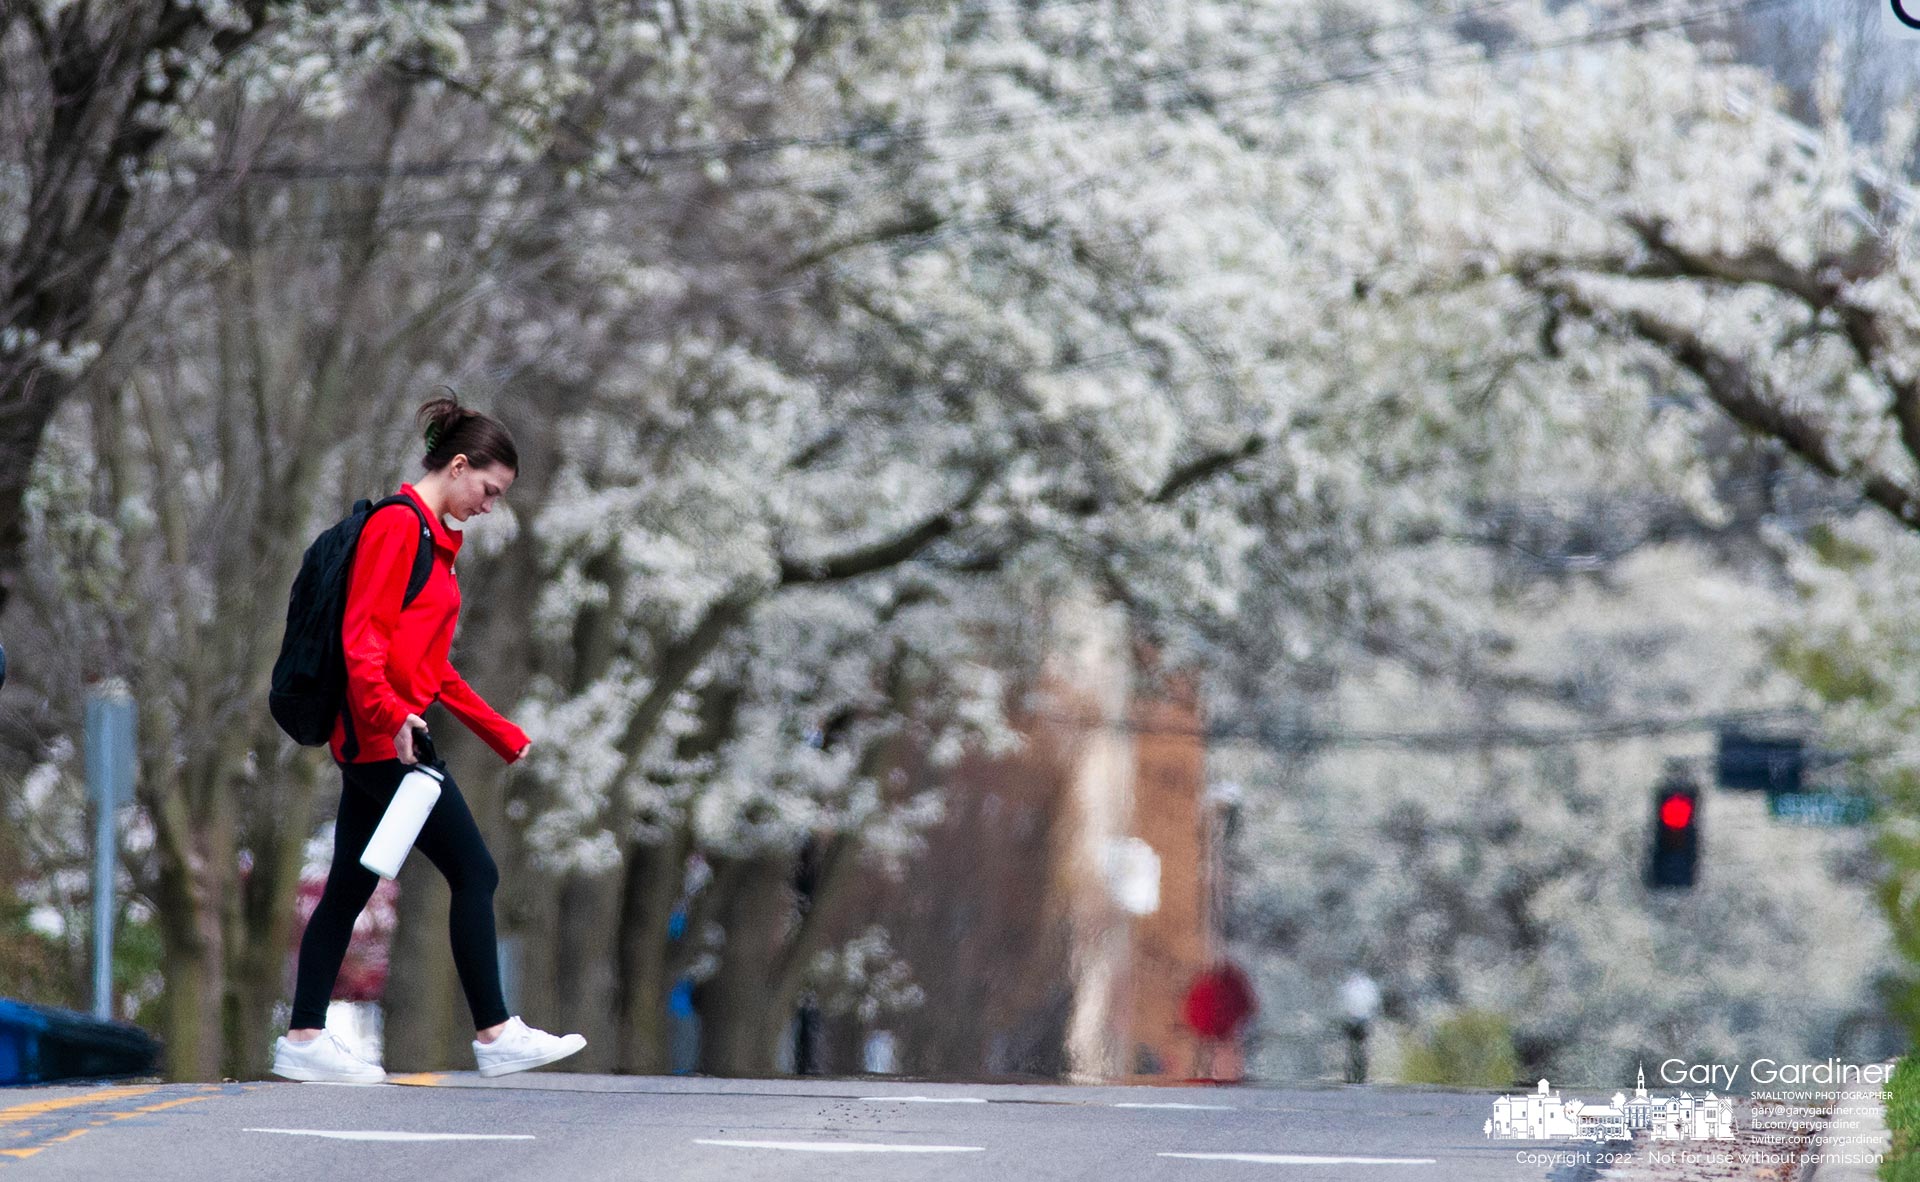 An Otterbein University student crosses Main Street near the flowering canopy of trees that line the roadway toward Uptown Westerville. My Final Photo for April 12, 2022.